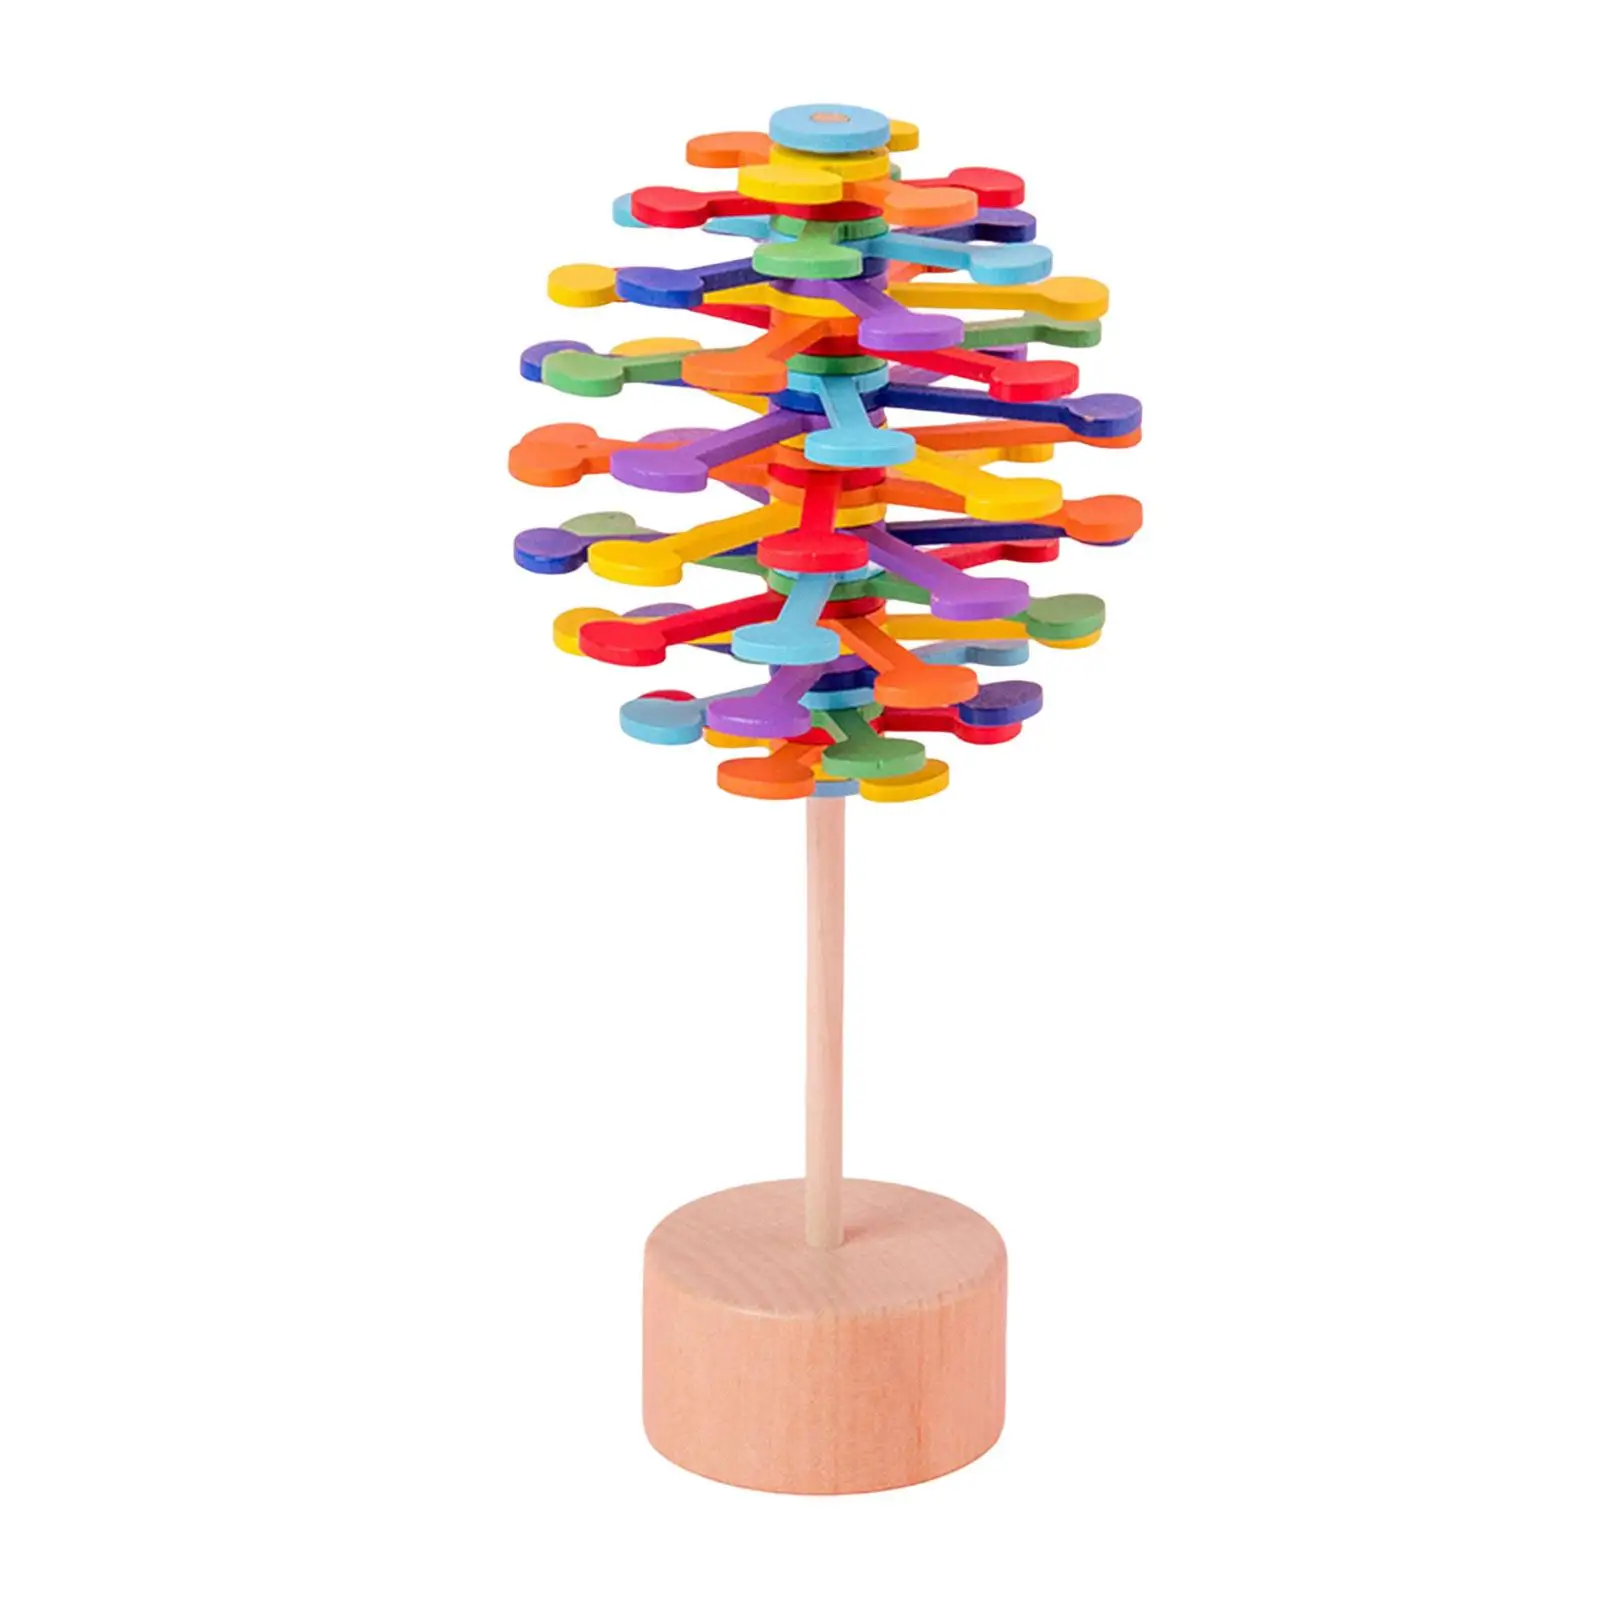 Novelty Wooden Rotary Spiral Lollipop Tricks Props Sensory Toys Multicolor Rotating Spiral Lollipop for Birthday Party Favors